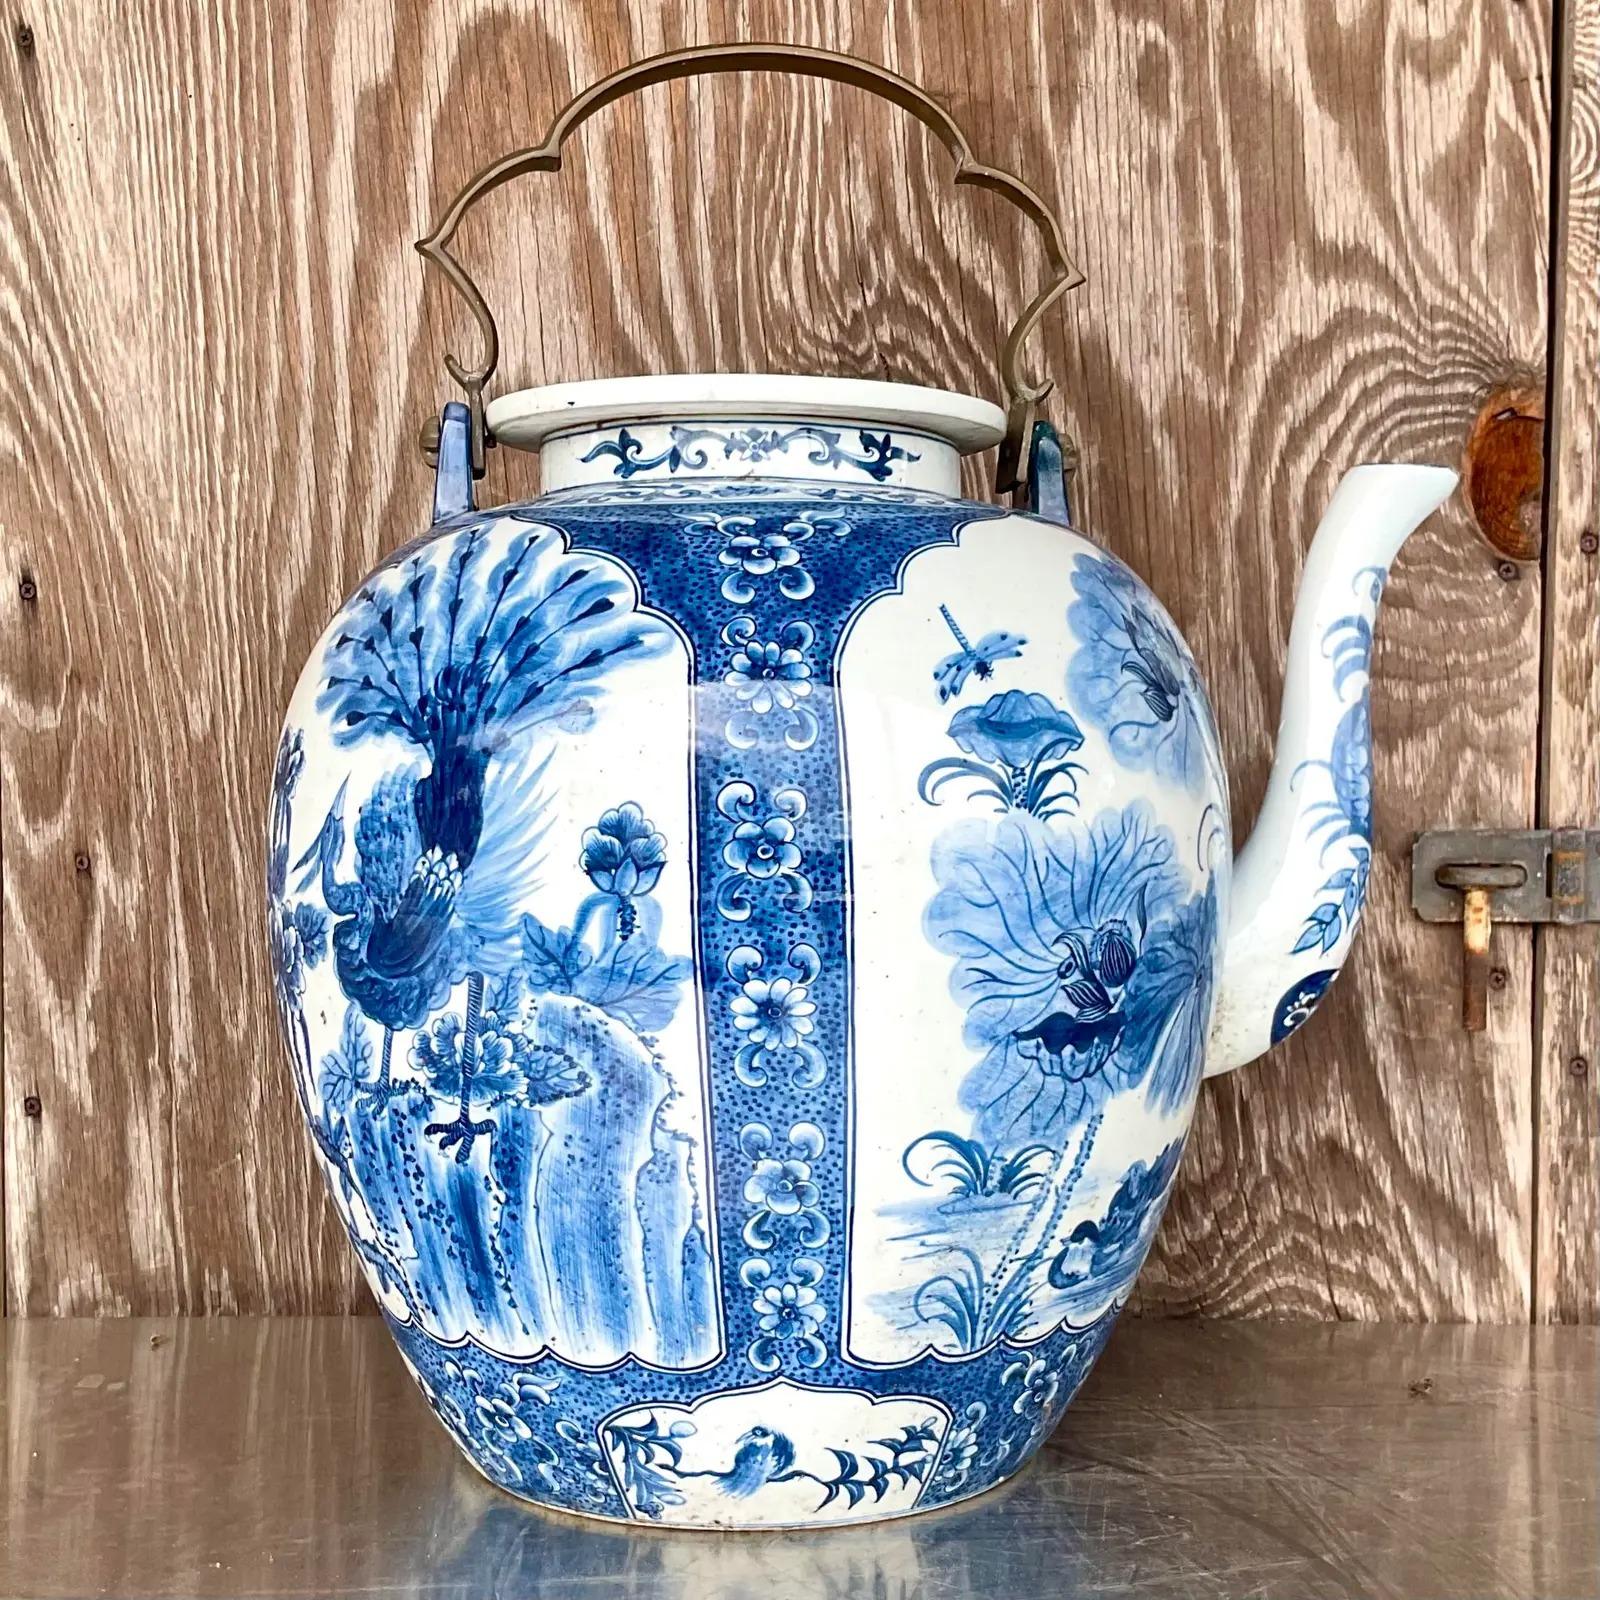 North American Vintage Monumental Asian Blue and White Crane Teapot